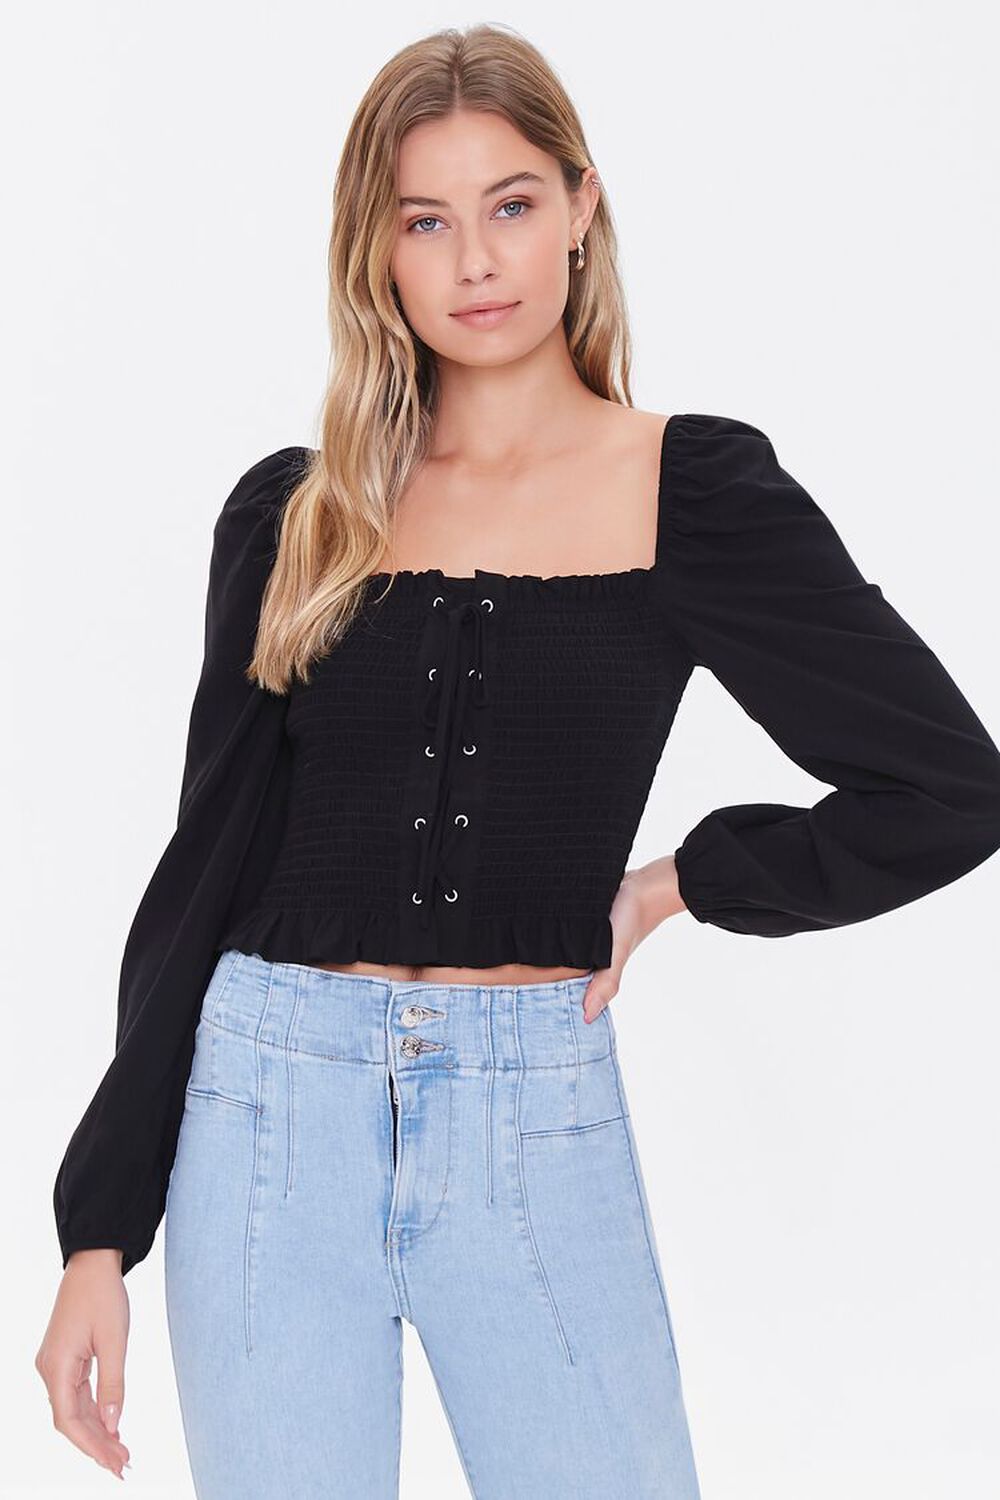 BLACK Smocked Lace-Up Top, image 1